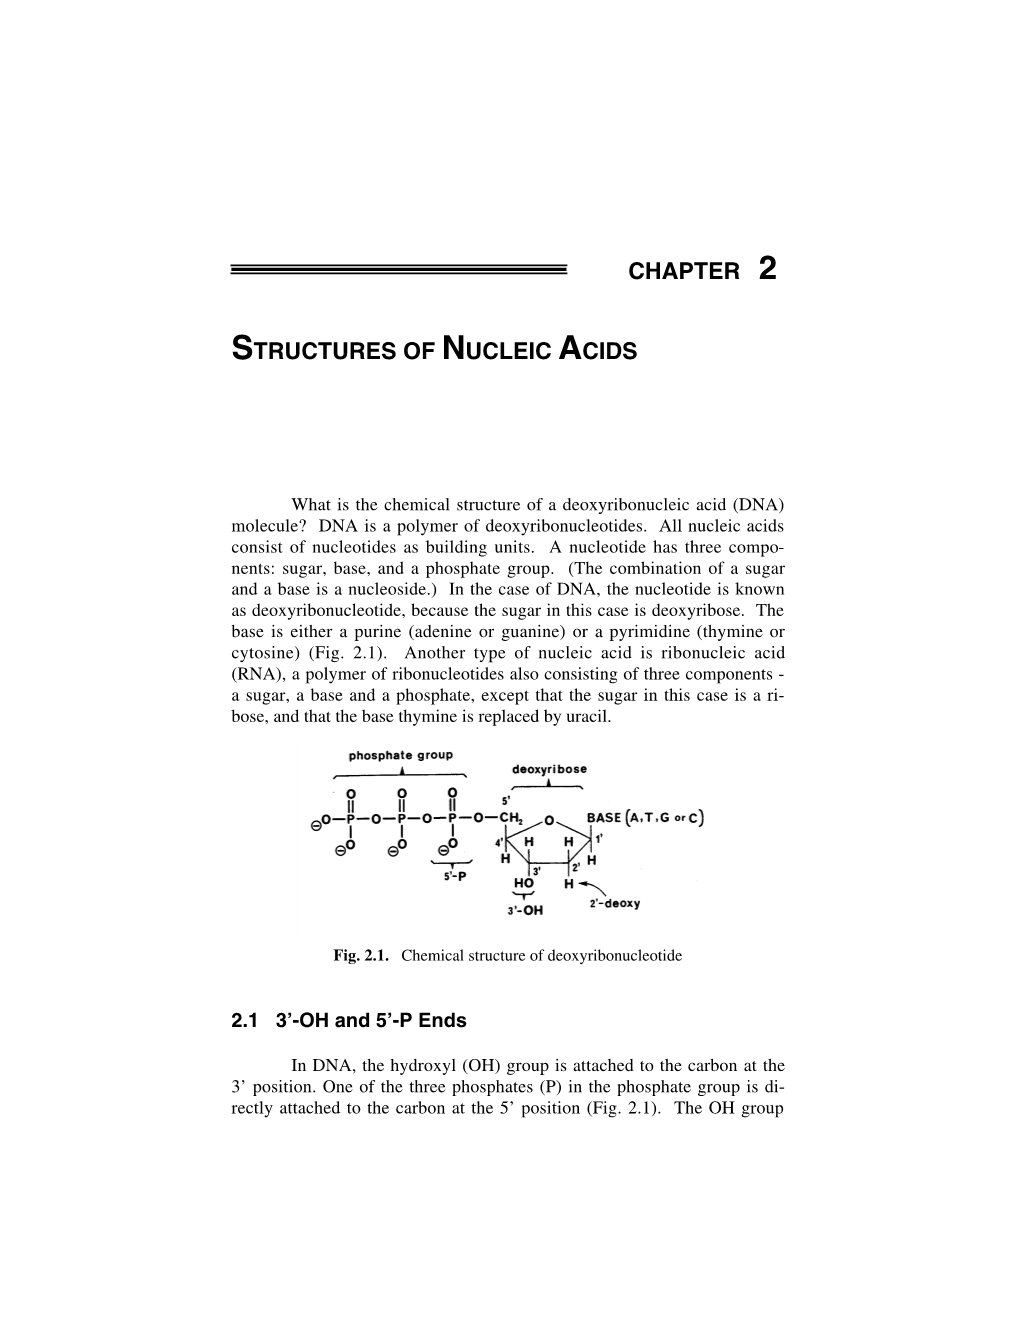 Chapter 2 Structures of Nucleic Acids